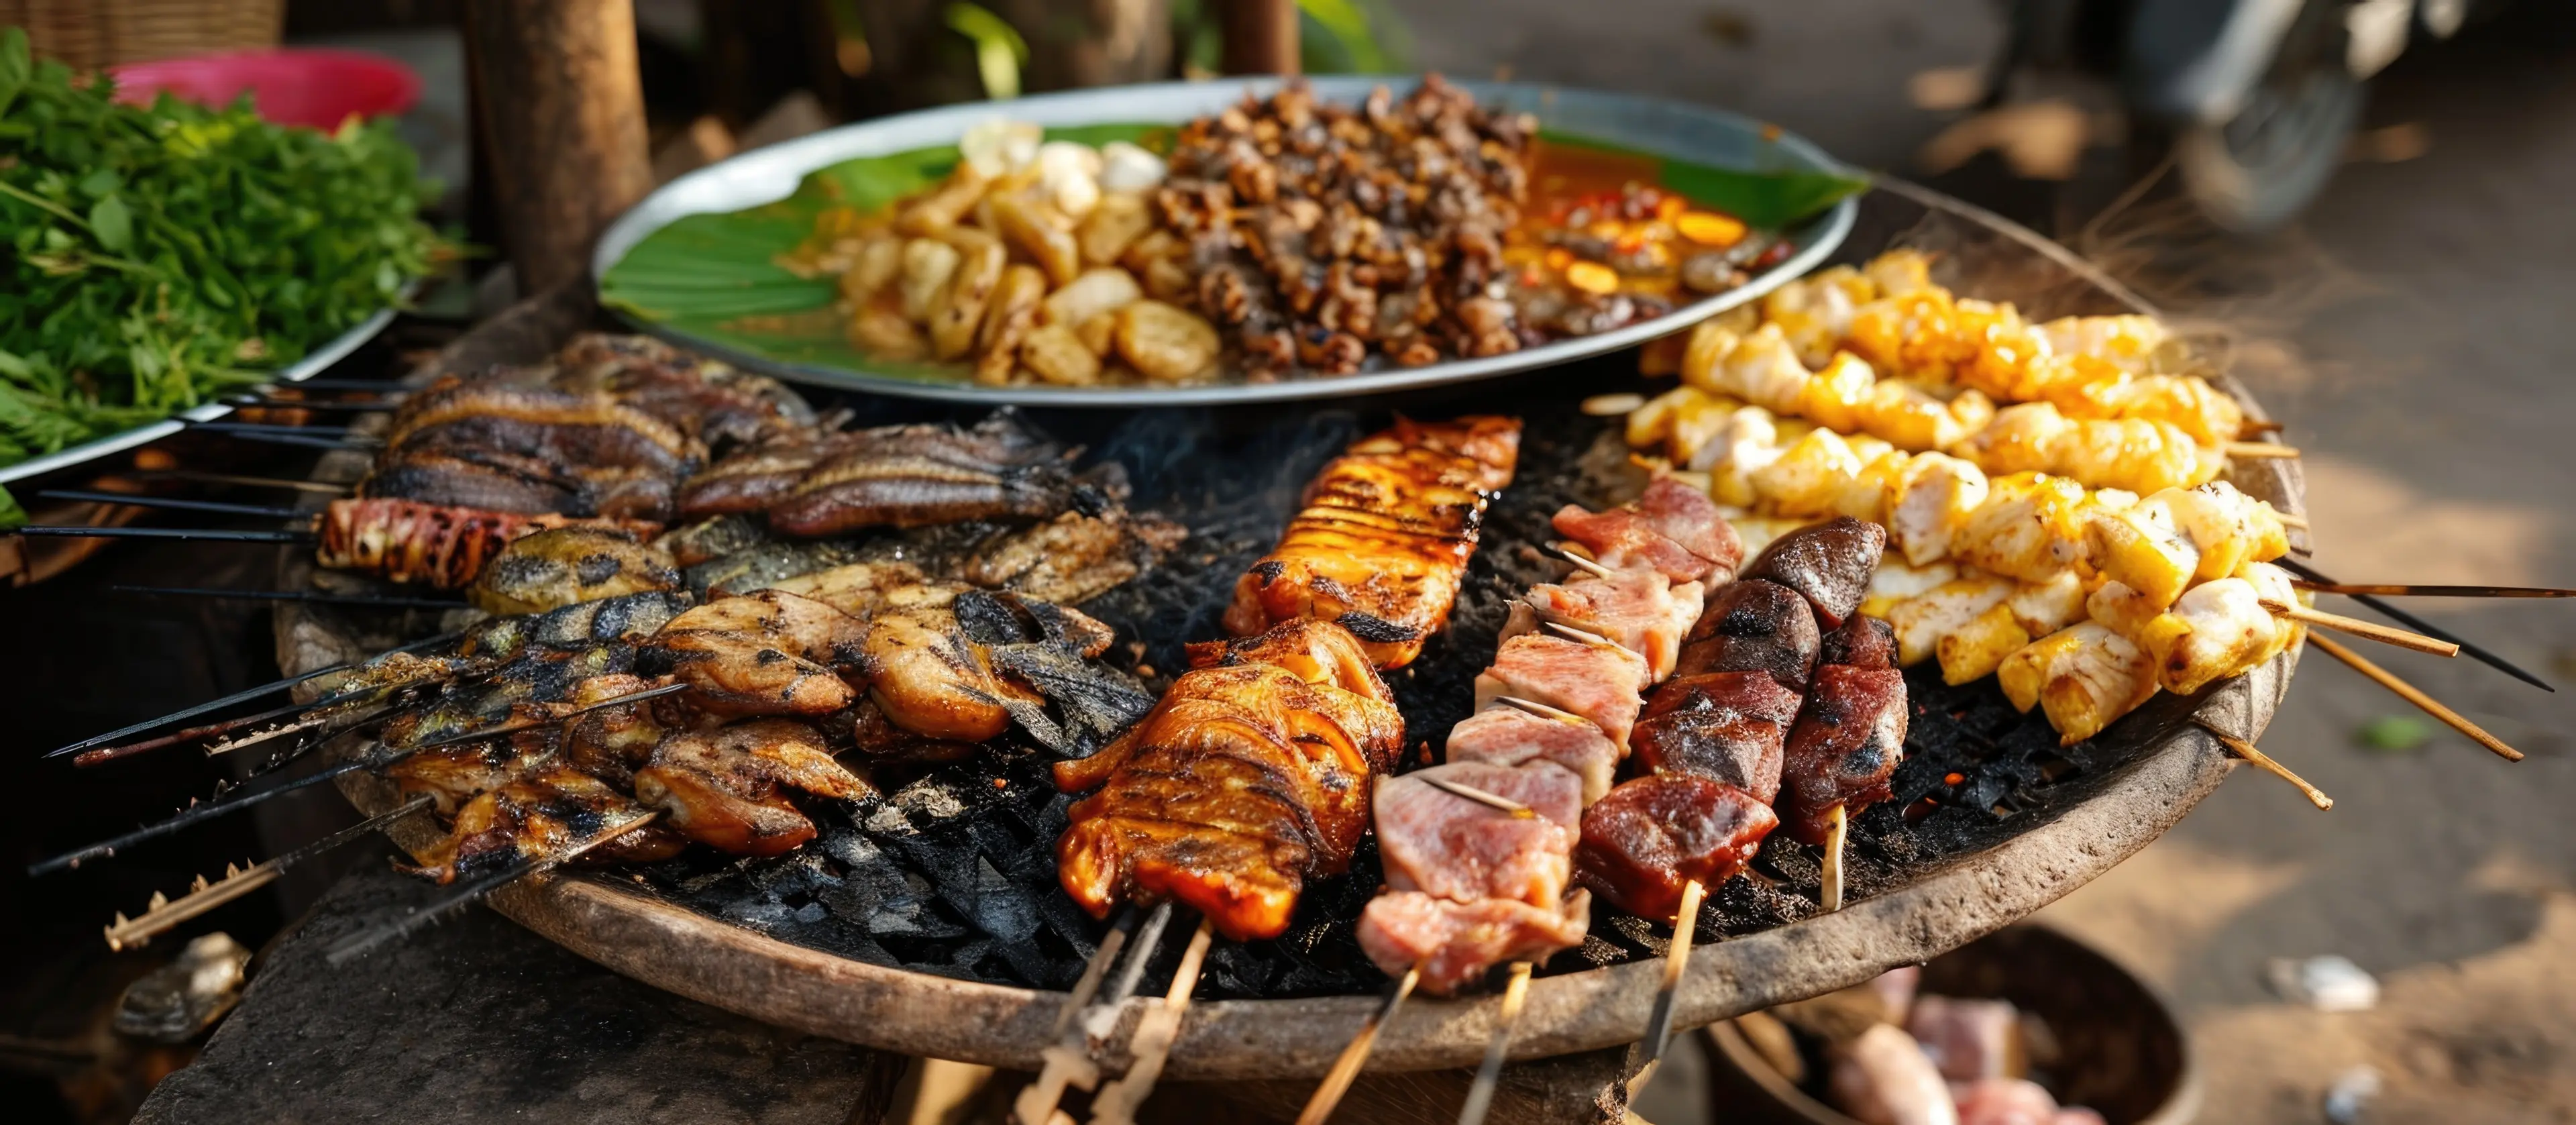 Khmer barbecue